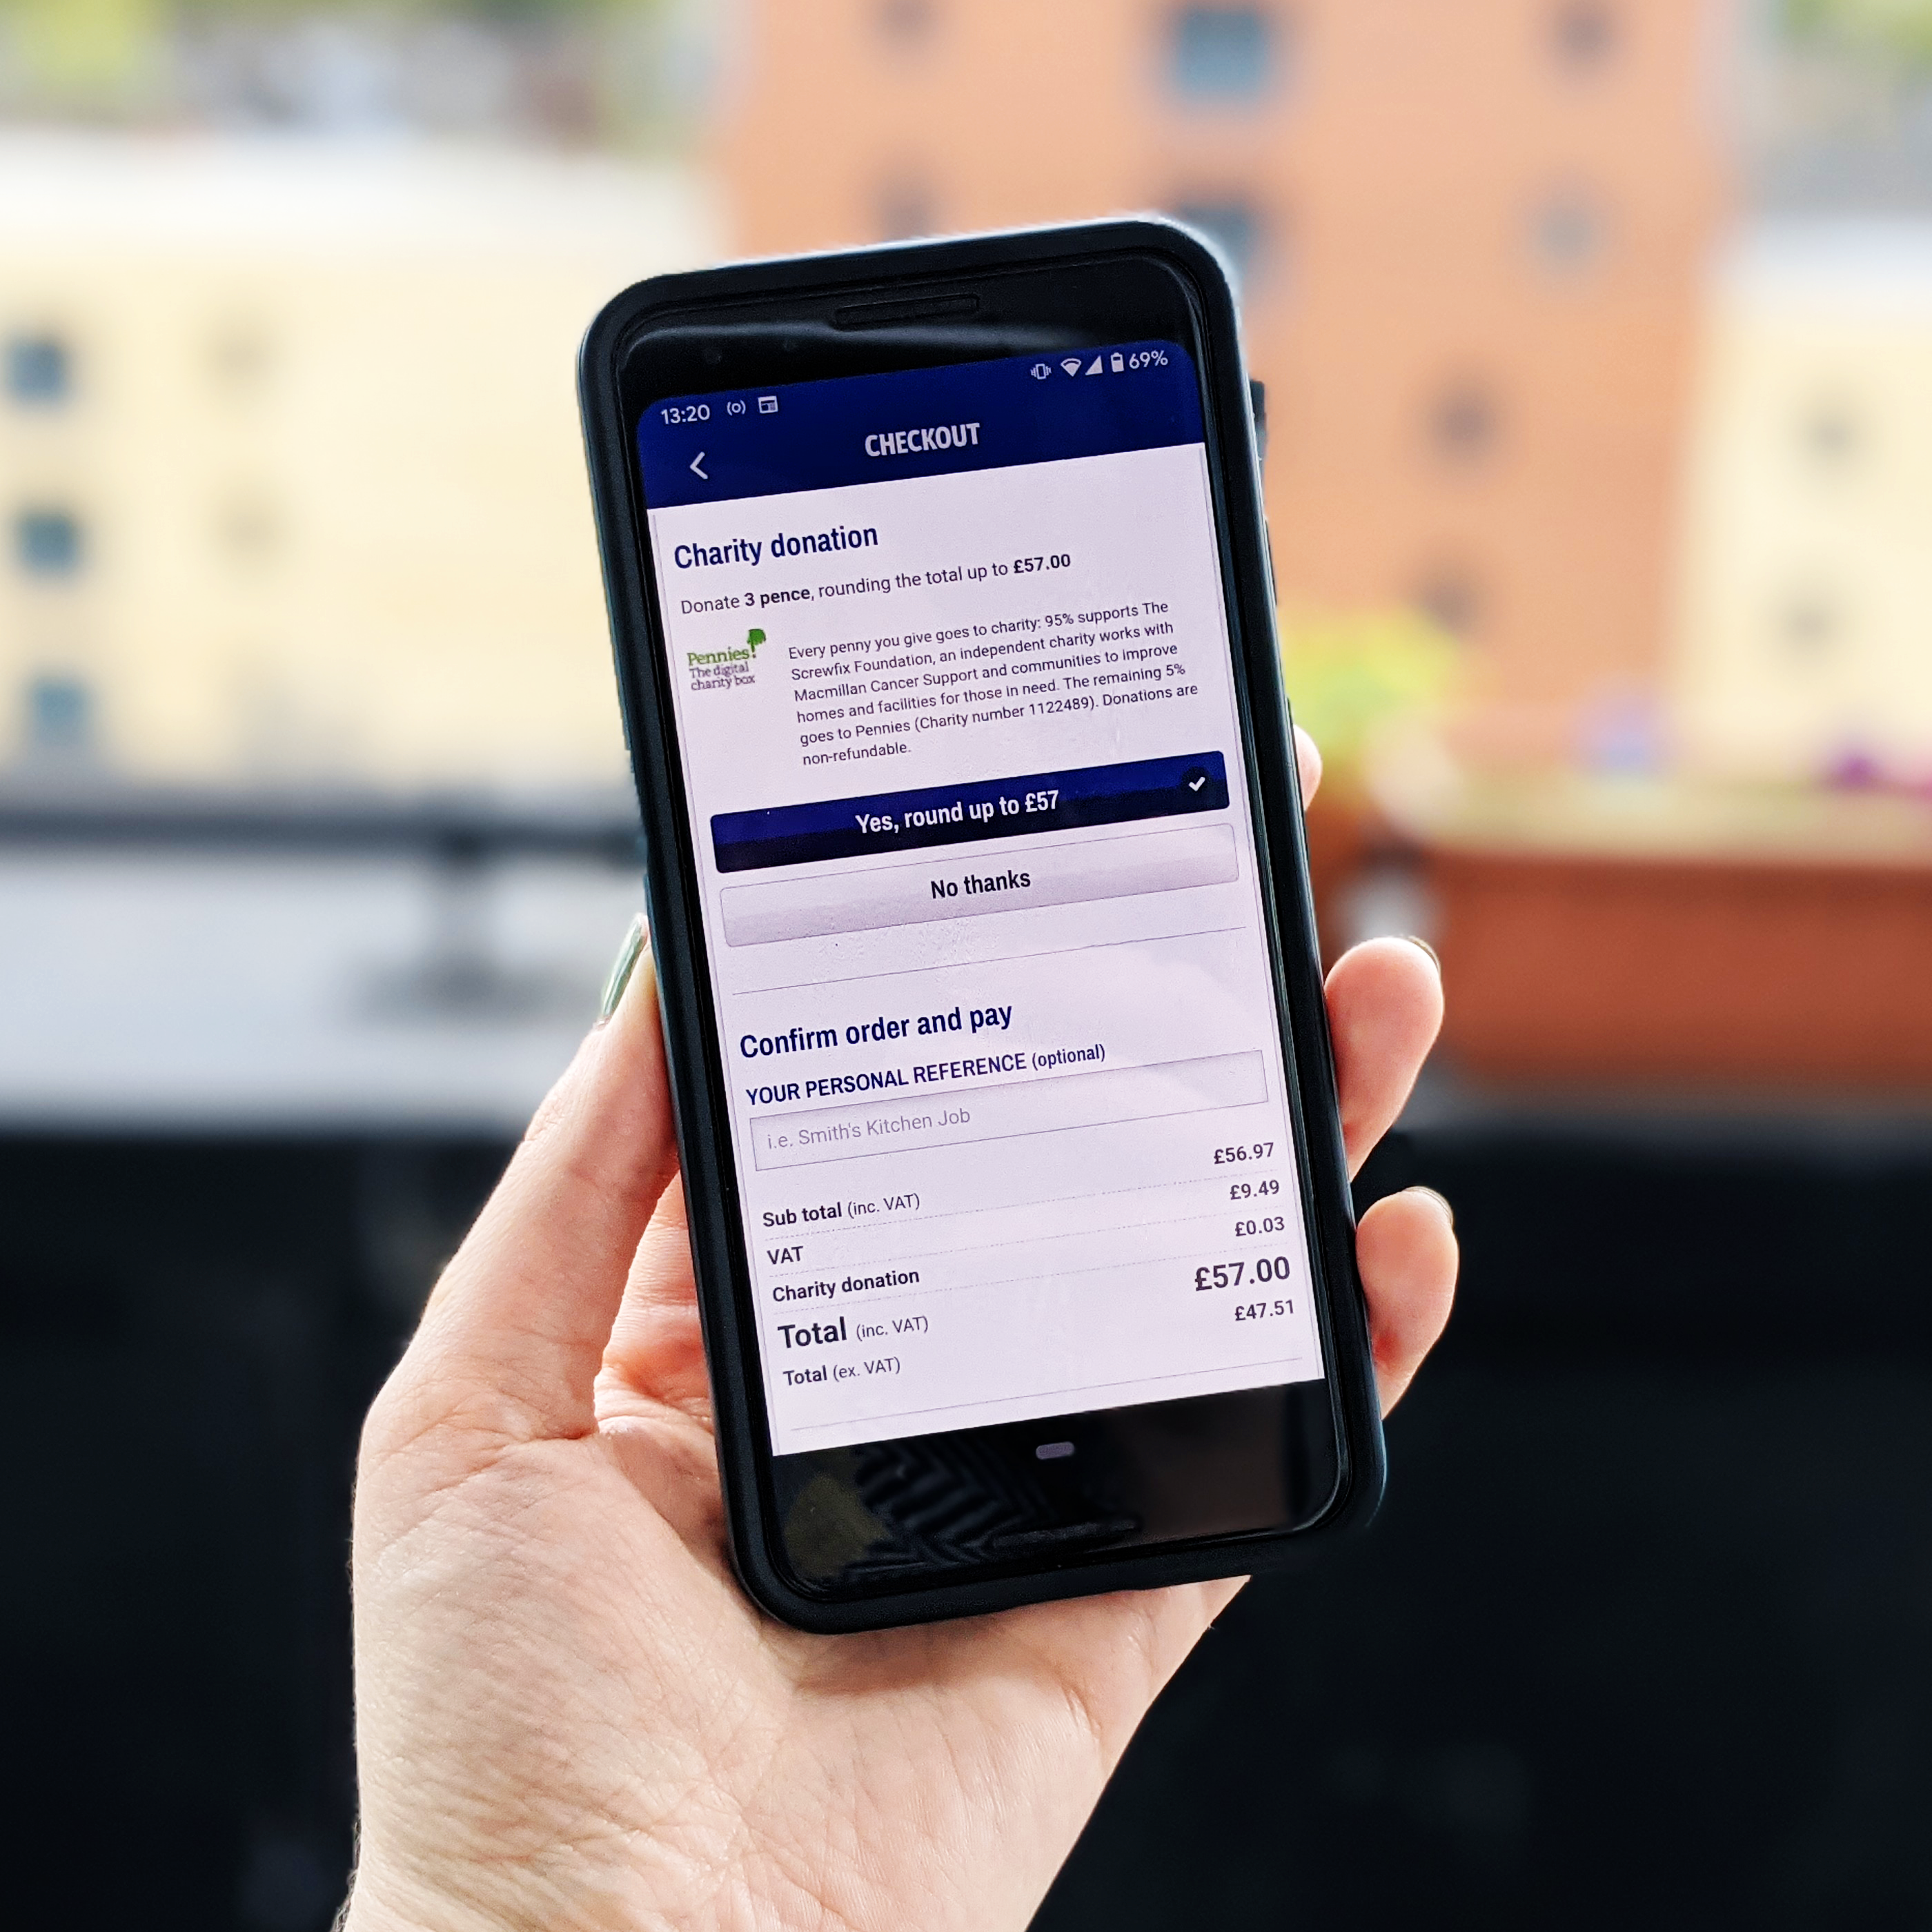 Customer makes a micro-donation on an in-app payment with Screwfix